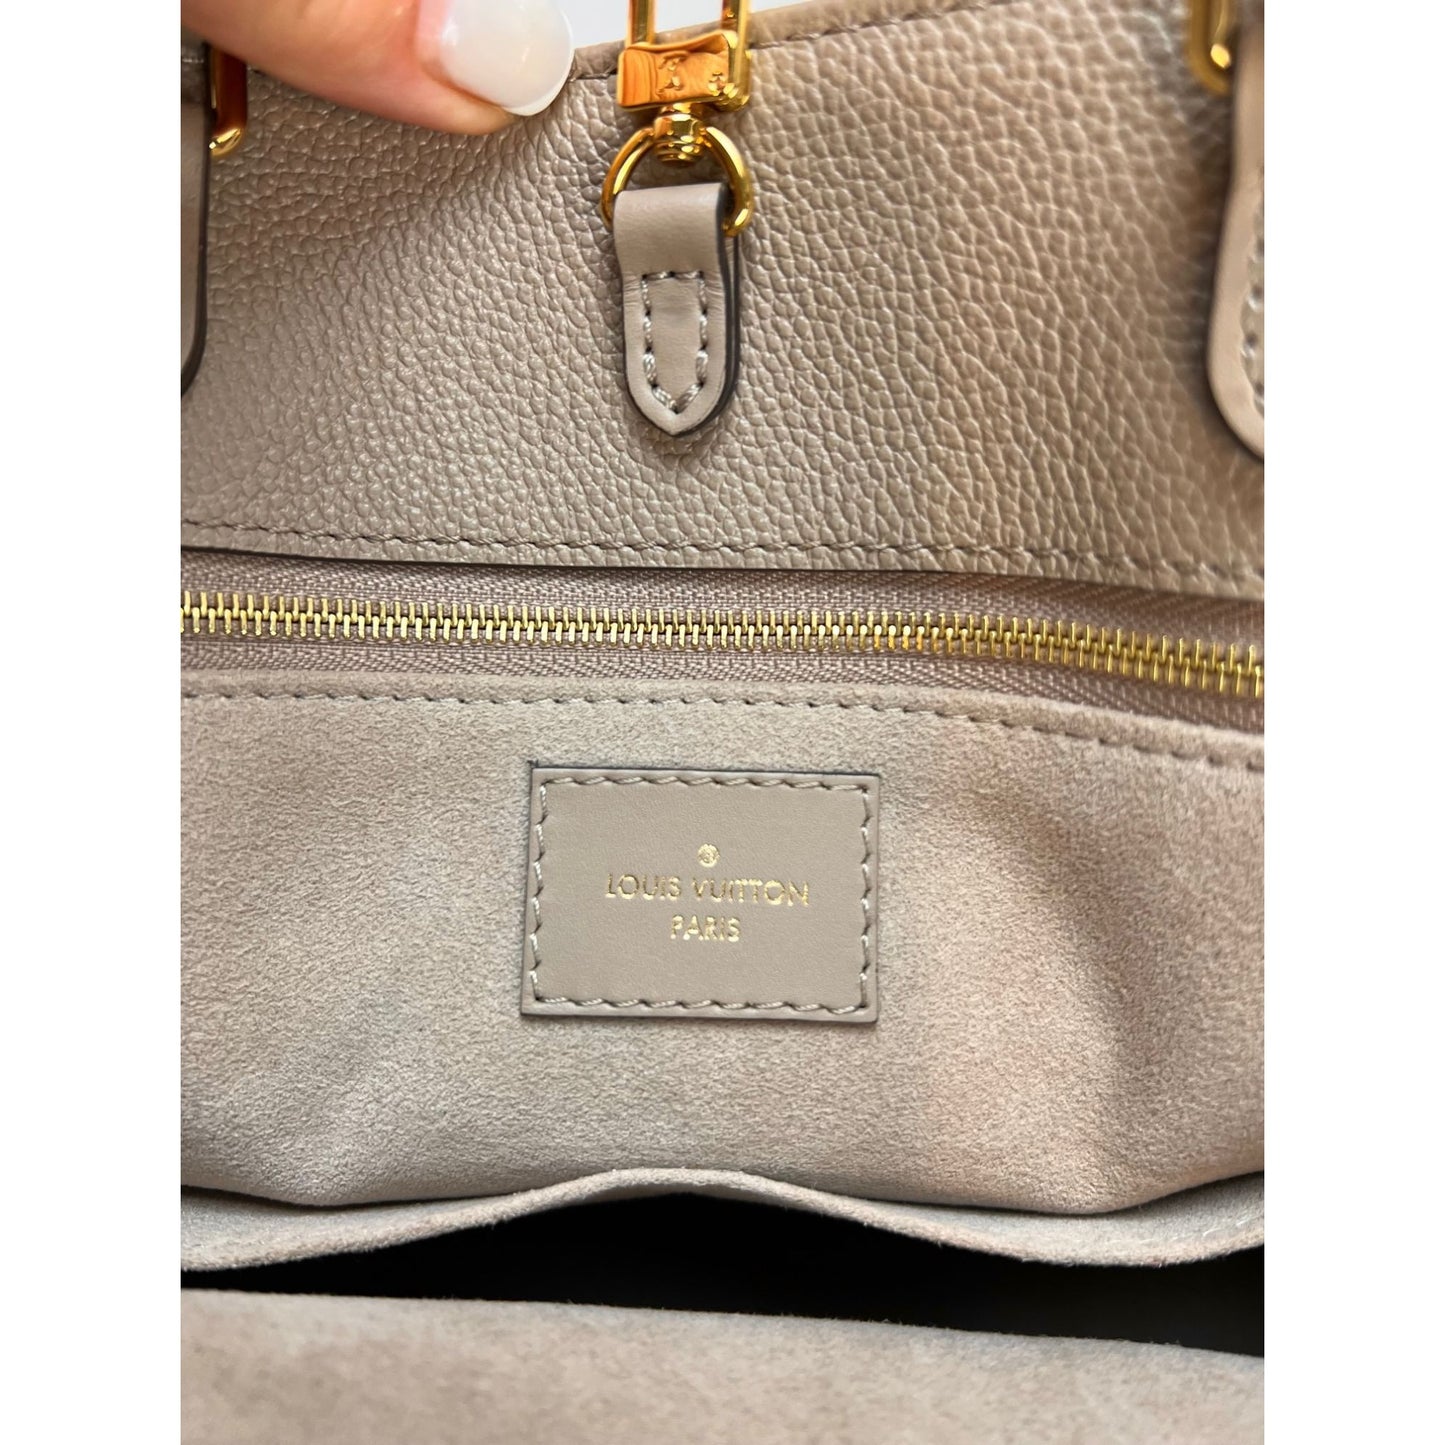 Louis Vuitton on The Go mm, Beige, One Size